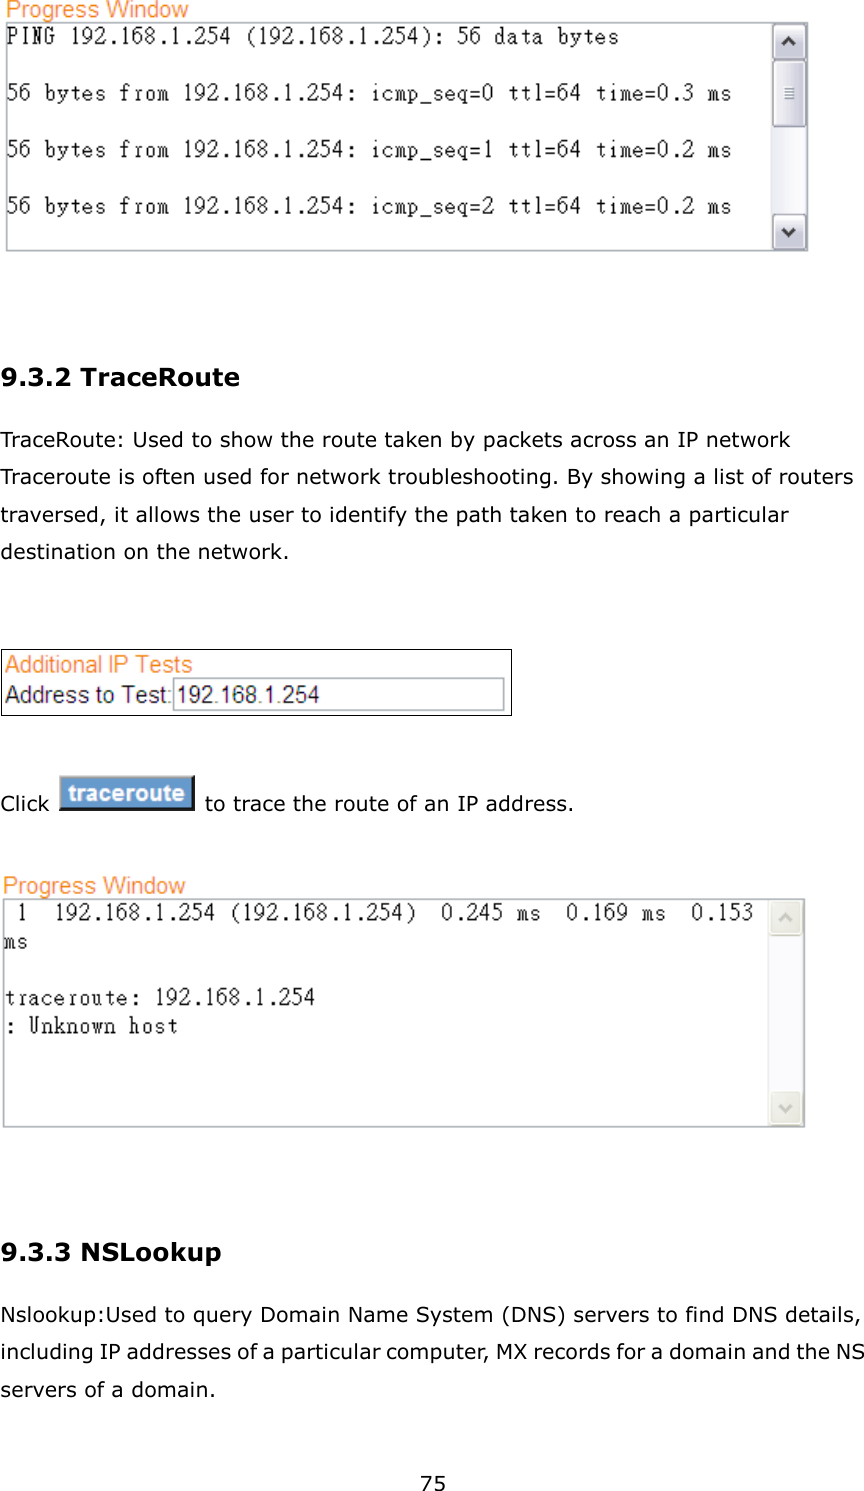 75   9.3.2 TraceRoute   TraceRoute: Used to show the route taken by packets across an IP network Traceroute is often used for network troubleshooting. By showing a list of routers traversed, it allows the user to identify the path taken to reach a particular destination on the network.     Click    to trace the route of an IP address.                       9.3.3 NSLookup Nslookup:Used to query Domain Name System (DNS) servers to find DNS details, including IP addresses of a particular computer, MX records for a domain and the NS servers of a domain.  